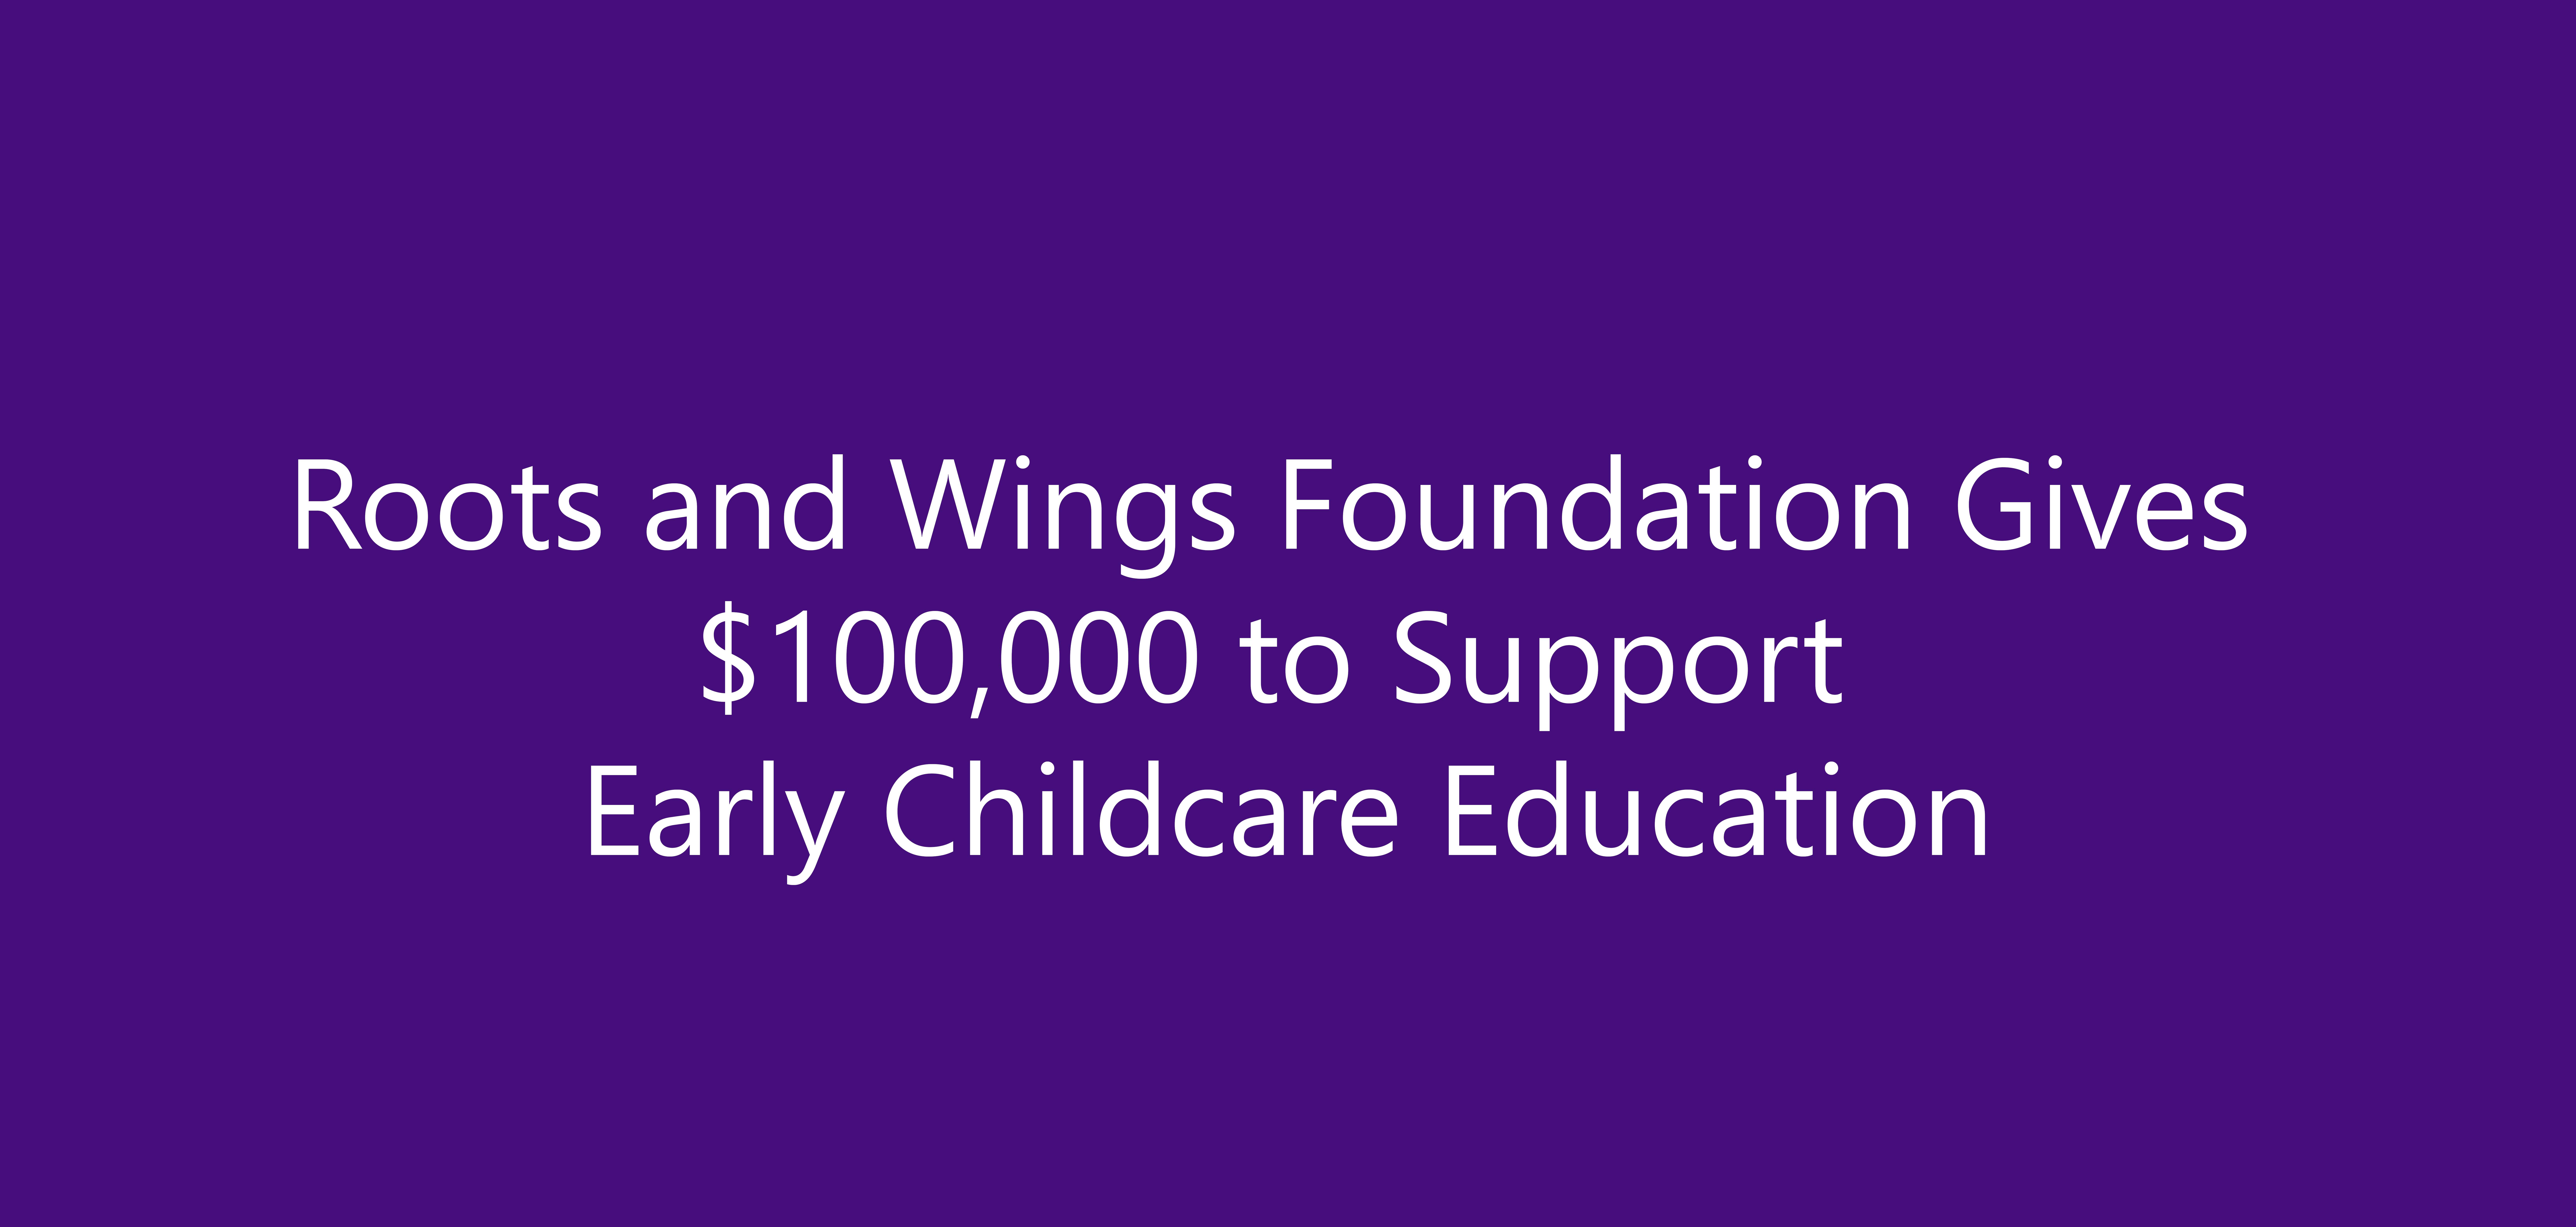 Roots and Wings gives $100,000 to support Early Childcare Education